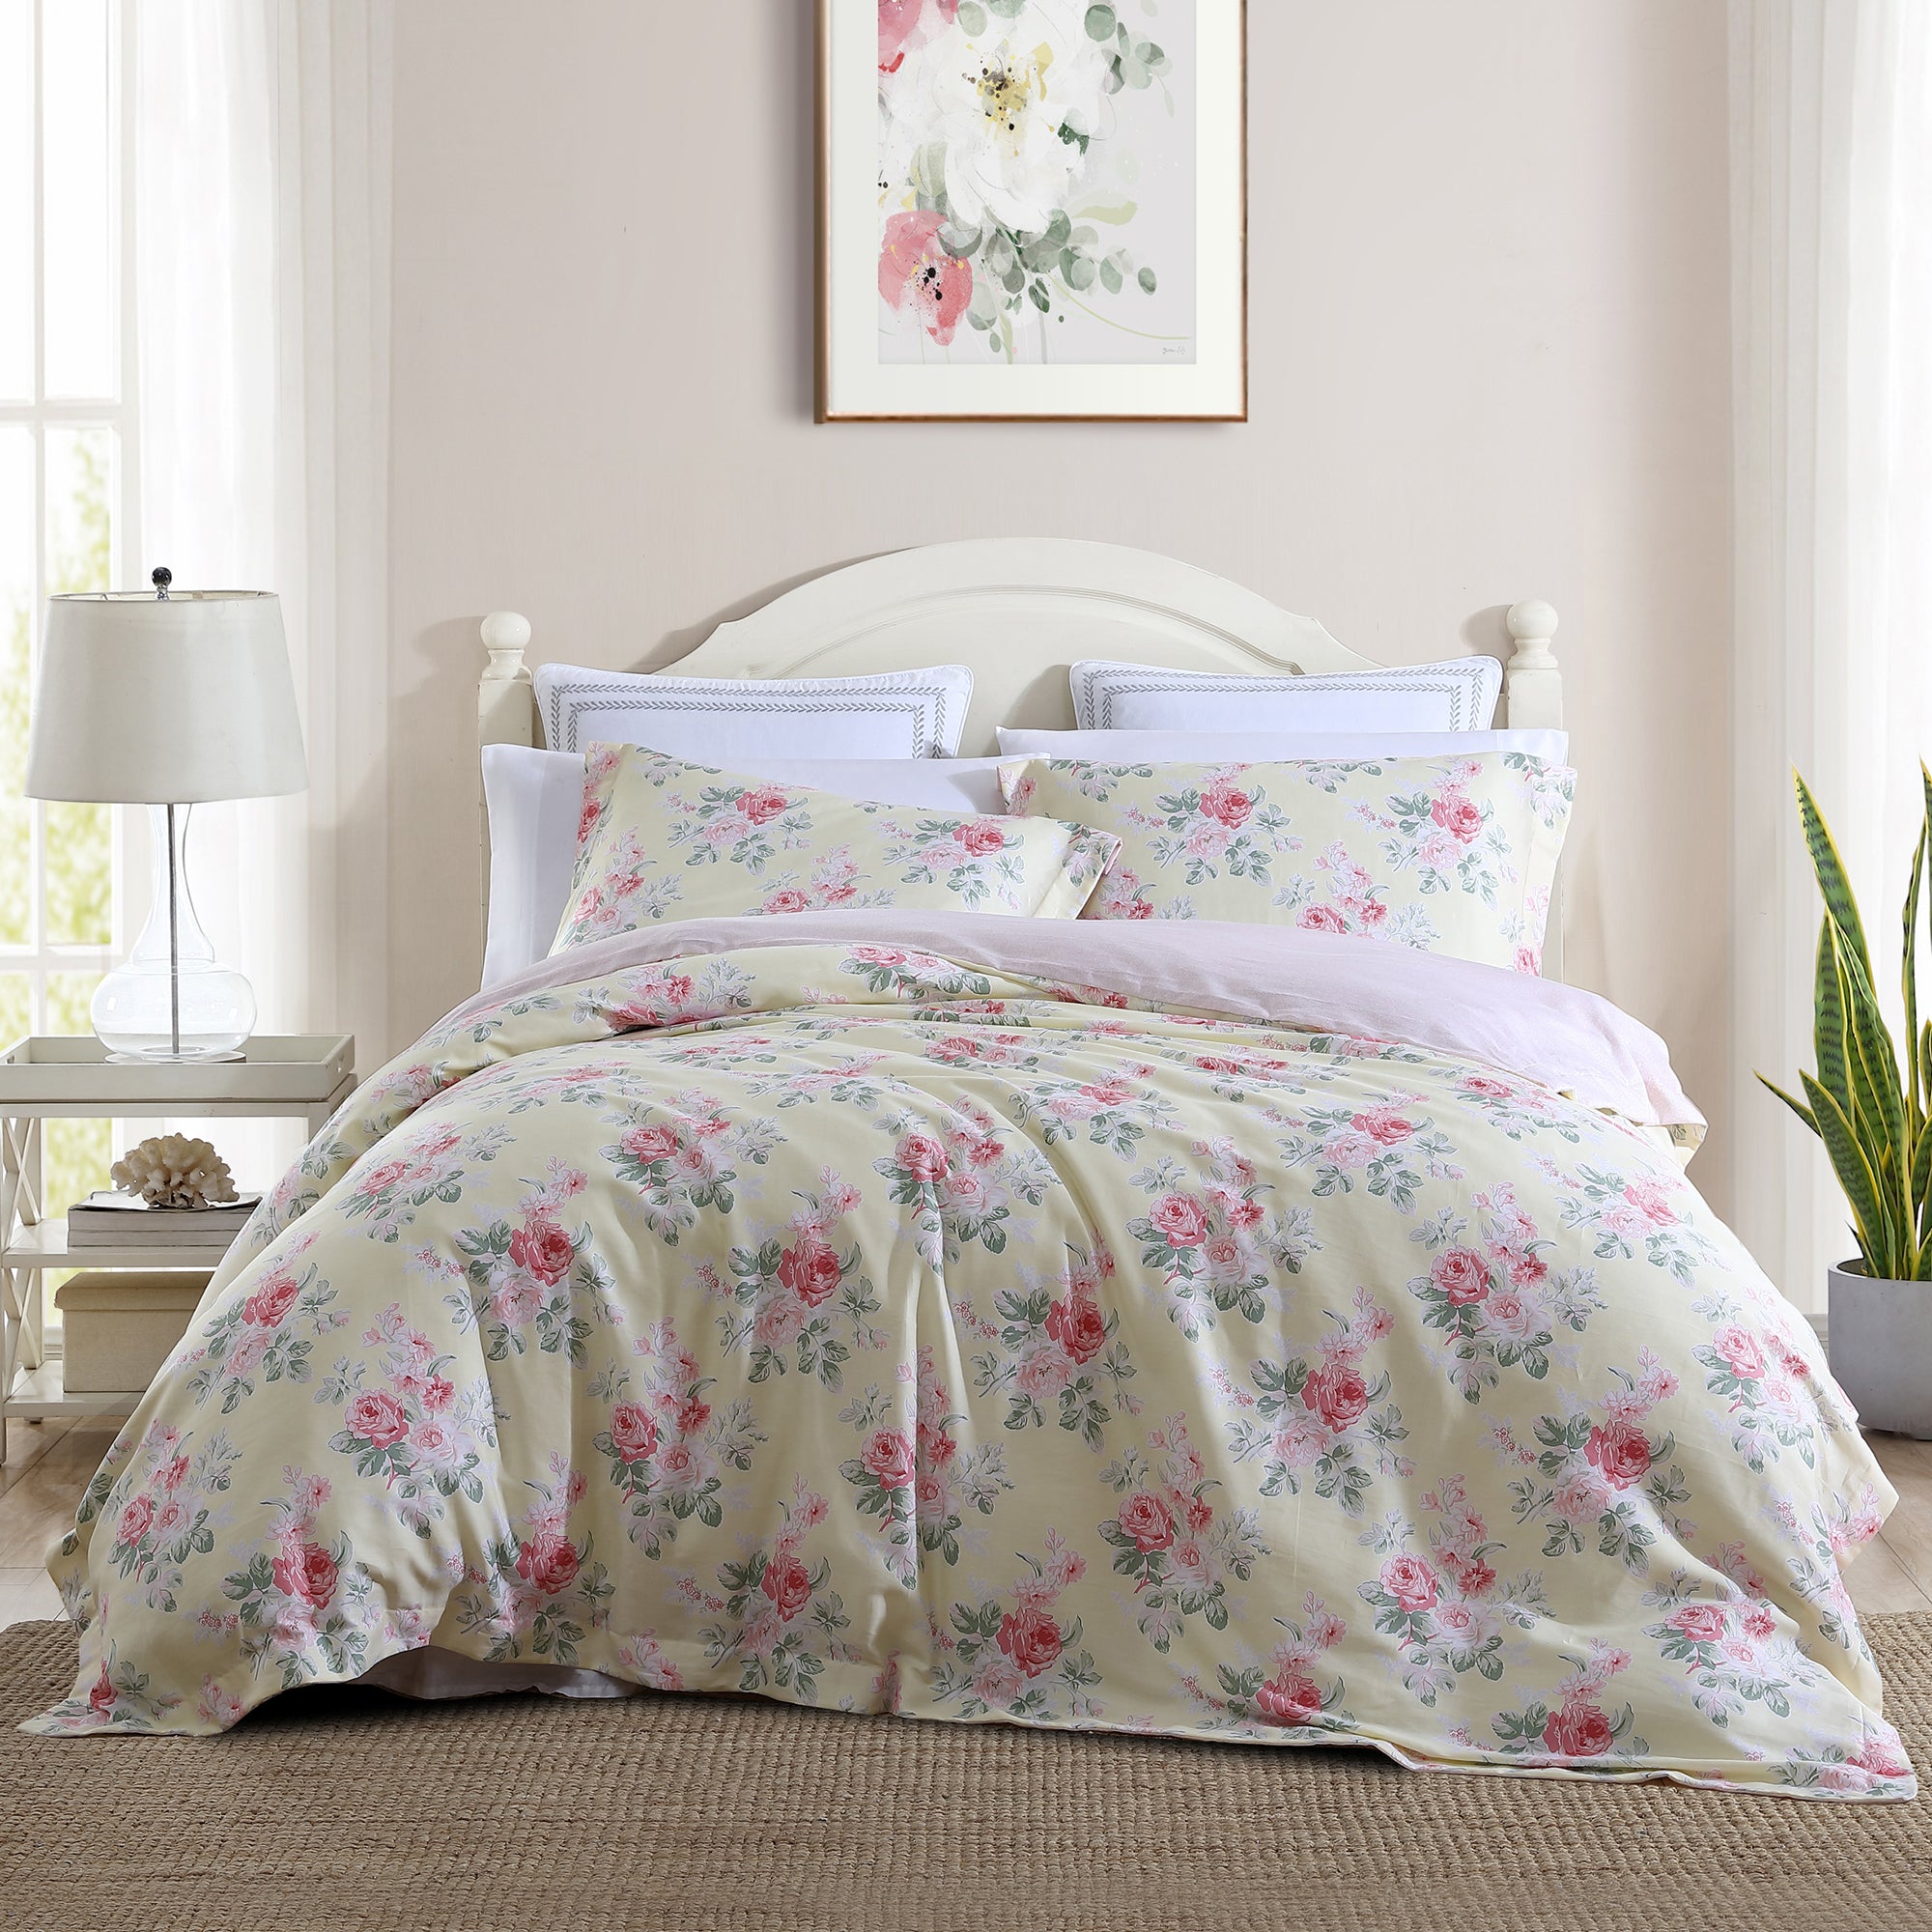 The Melany Quilt Cover Set Range Multi by Laura Ashley will transform your bedroom into a sweet, botanical retreat. Featuring a tailored edge and sunshine yellow ground with pink florals, this bedlinen includes a complementary mini floral on the reverse for a cheerful update.